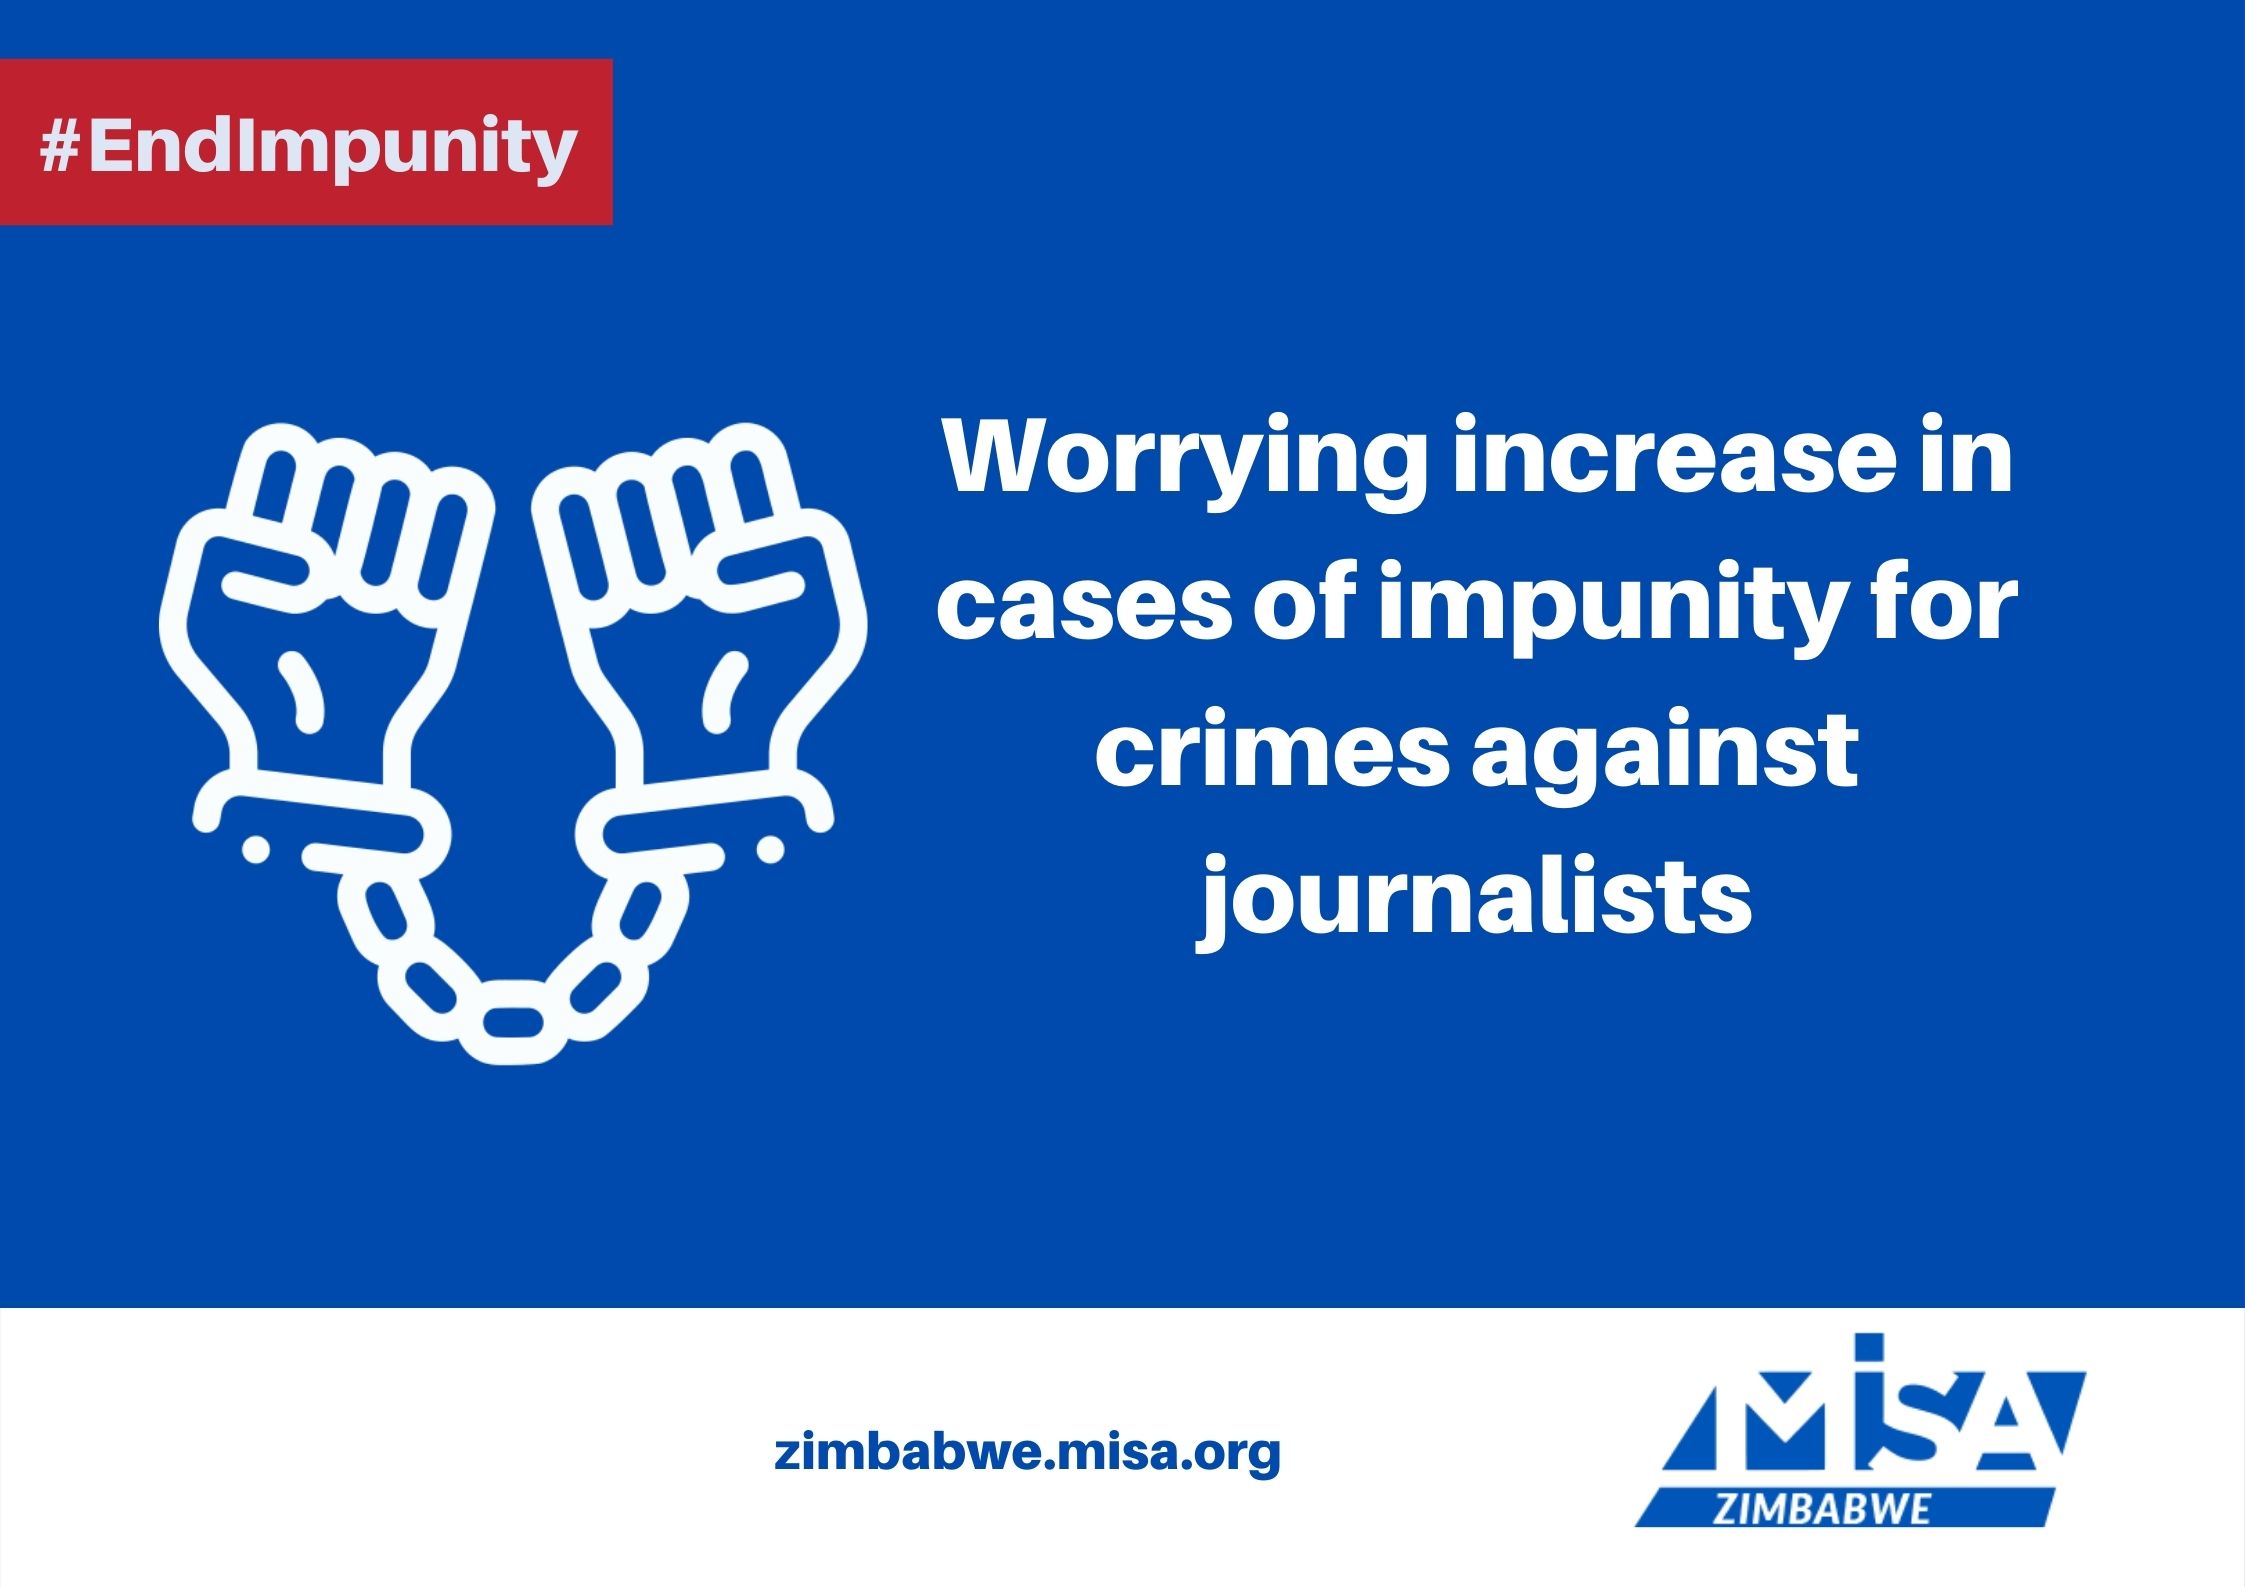 Worrying increase in cases of impunity for crimes against journalists